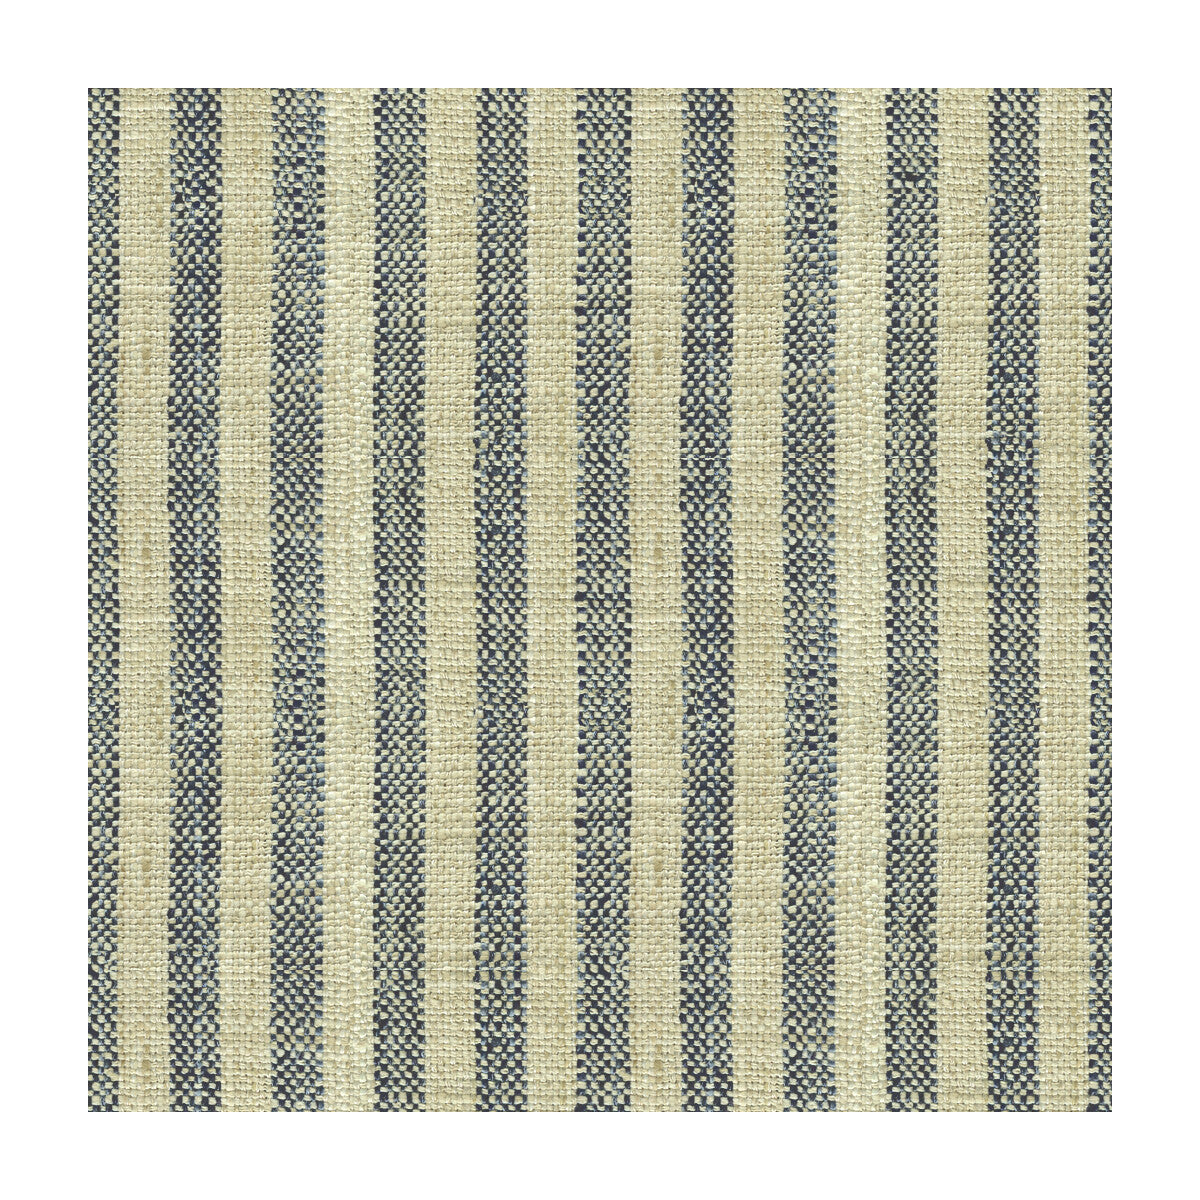 Kravet Basics fabric in 34080-516 color - pattern 34080.516.0 - by Kravet Basics in the Bungalow Chic II collection